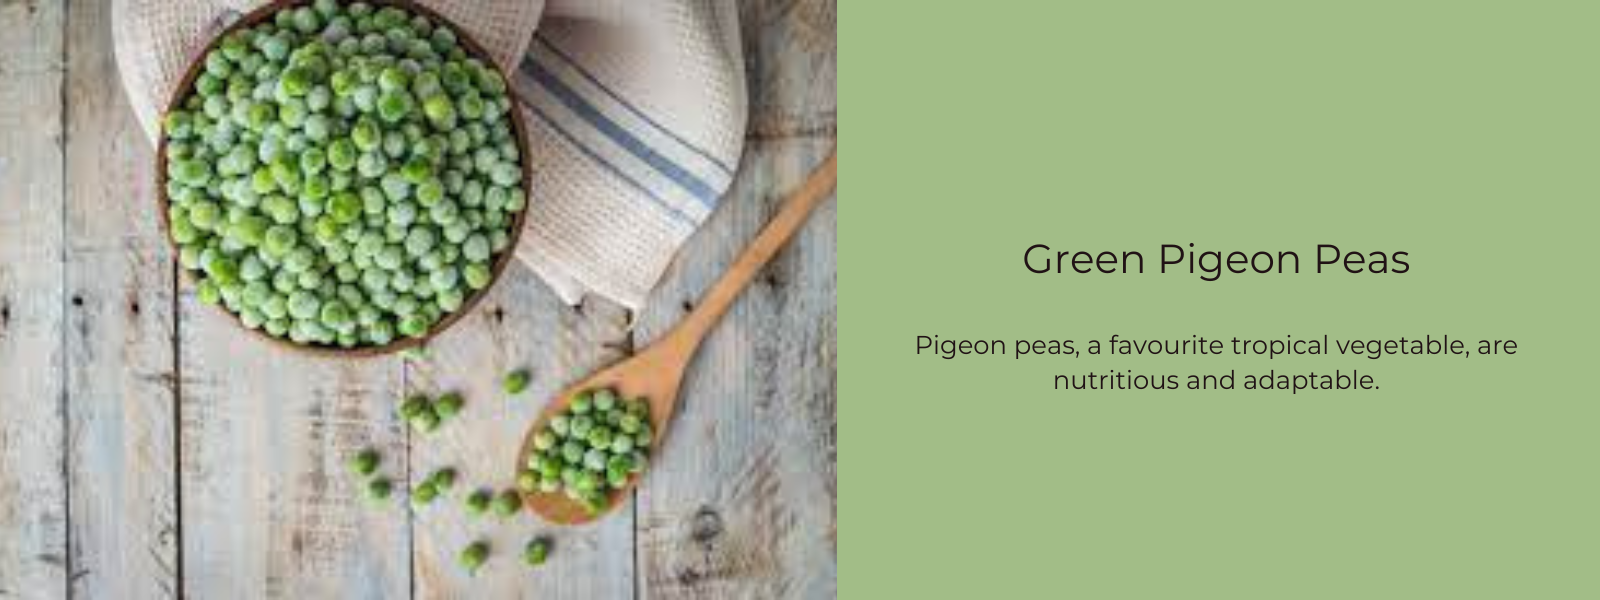 Green Pigeon Peas - Health Benefits, Uses and Important Facts